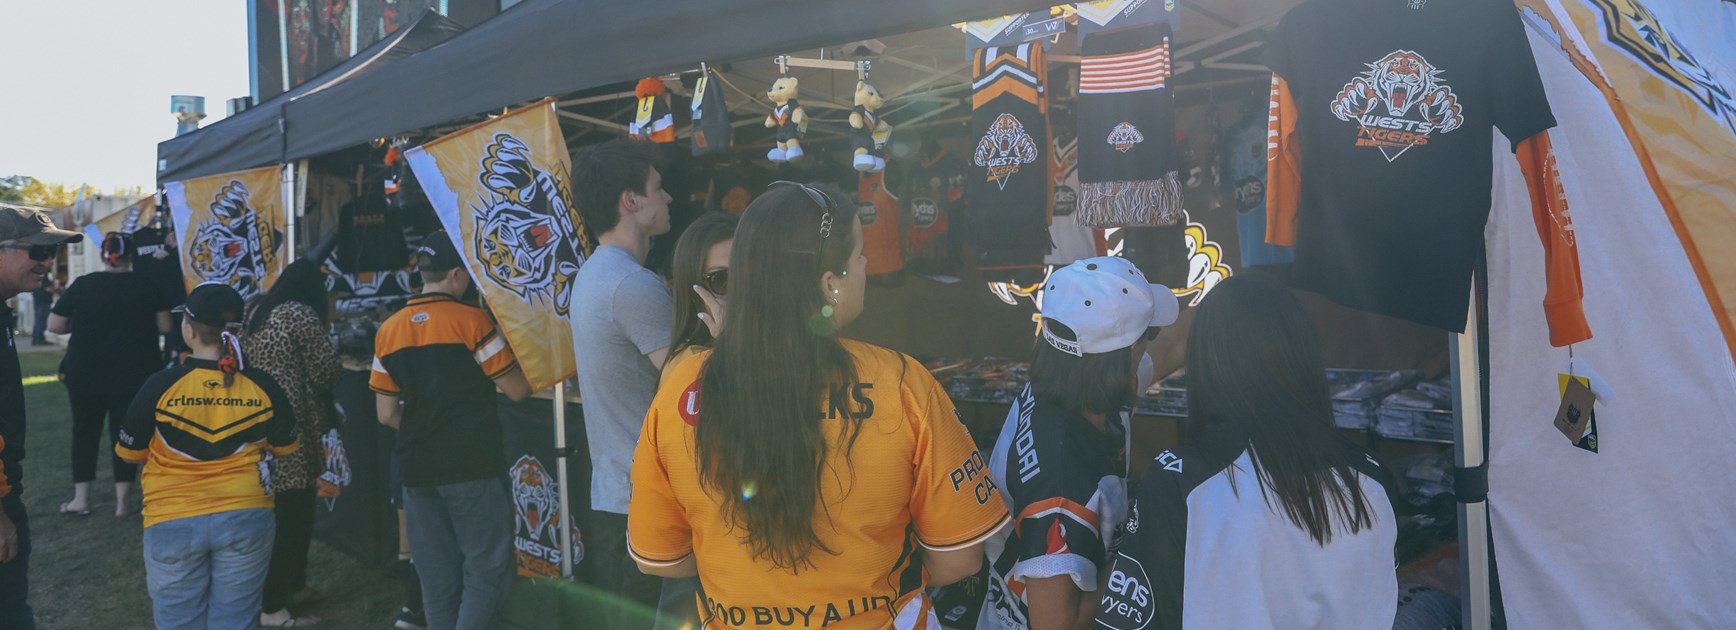 Catch Wests Tigers Roarstore van at Cintra Park!